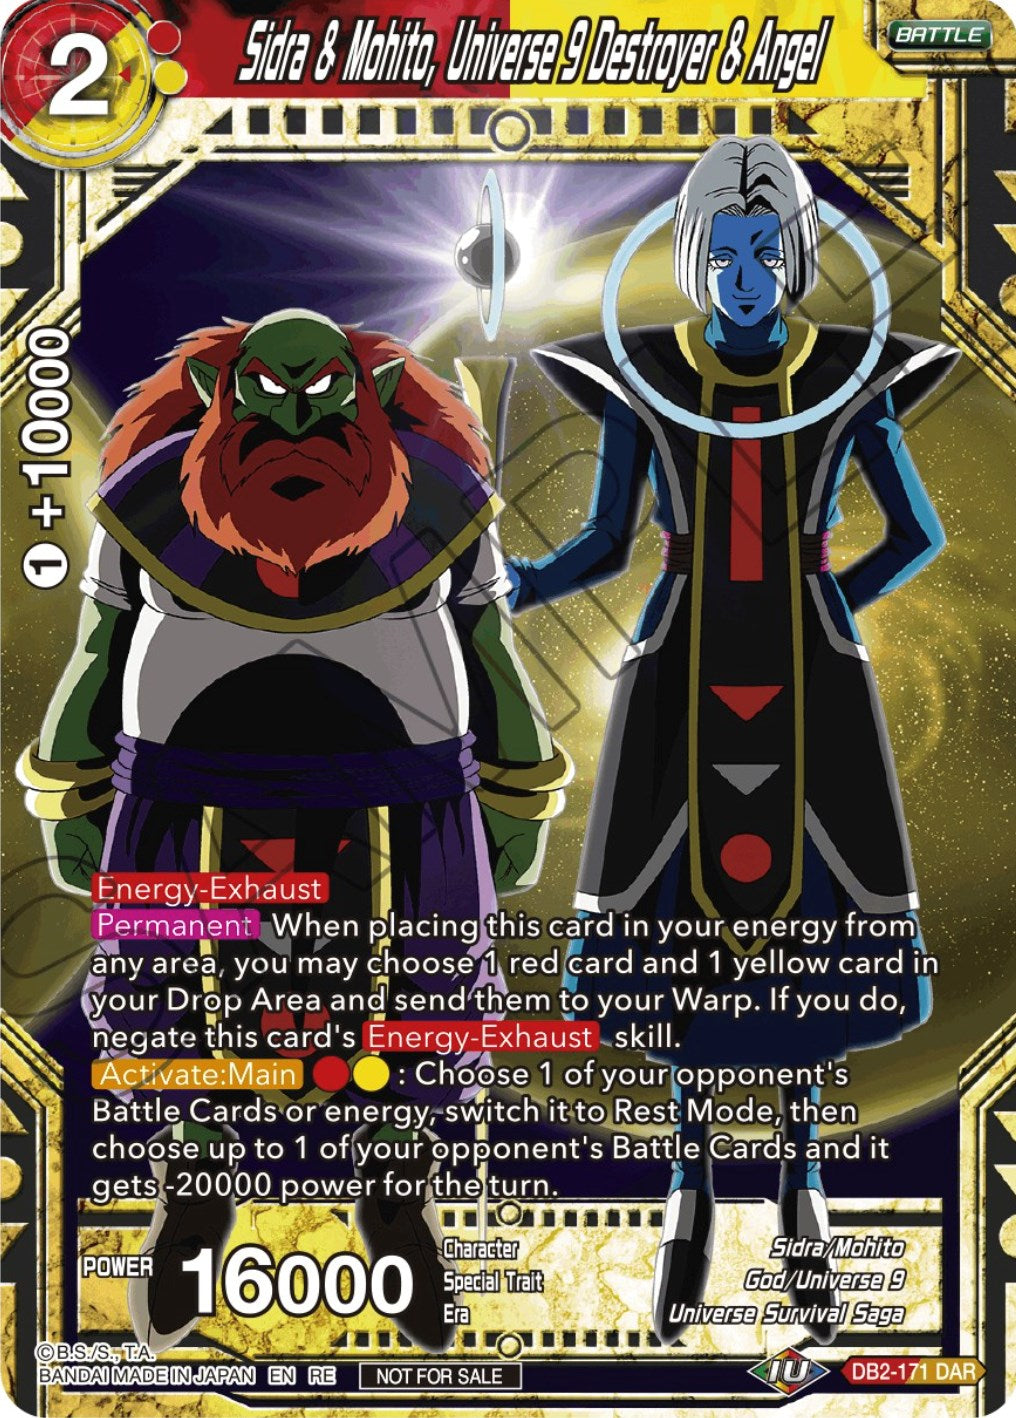 Sidra & Mohito, Universe 9 Destroyer & Angel (Championship Selection Pack 2023 Vol.2) (Silver Foil) (DB2-171) [Tournament Promotion Cards] | Sanctuary Gaming